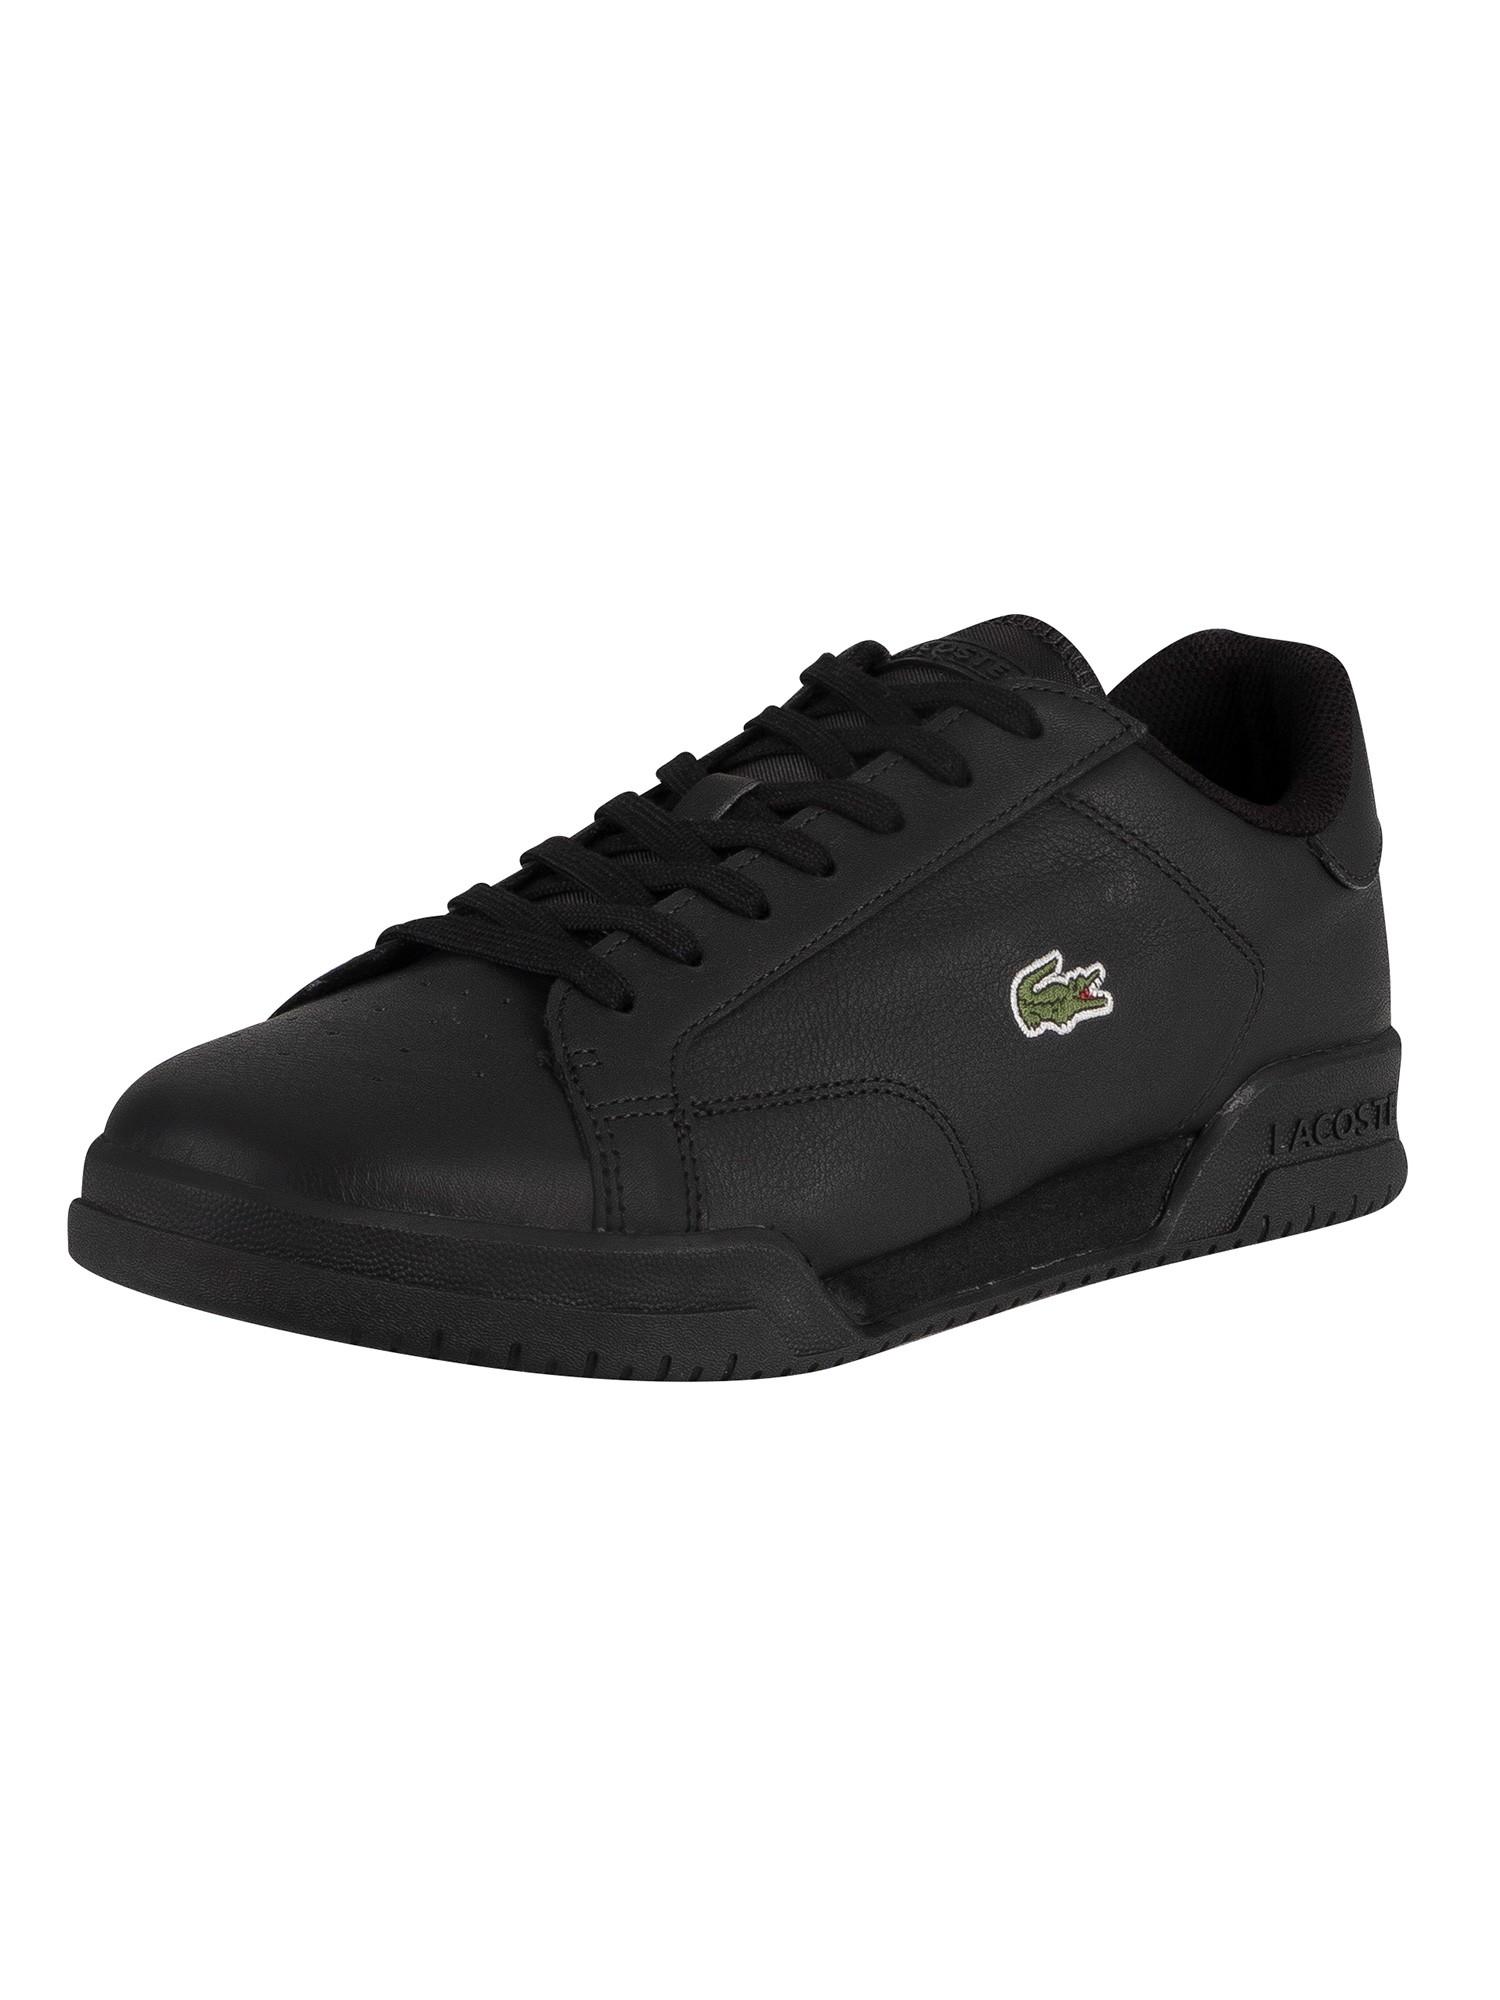 Lacoste Twin Serve 0721 2 Sma Leather Trainers in Black for Men | Lyst